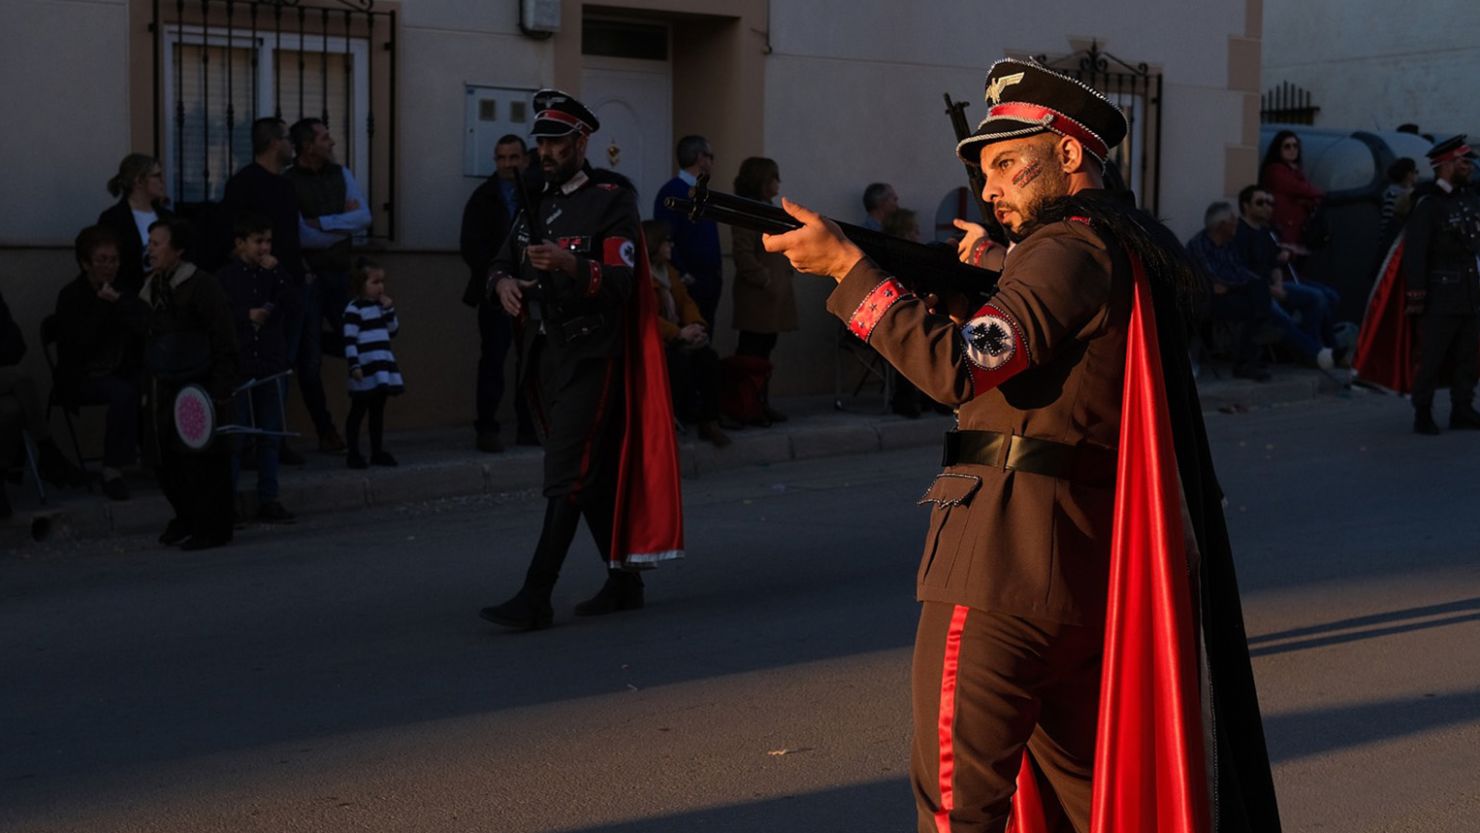 A man dressed as a Nazi soldier poses with gun at a carnival parade in Campo de Criptana, Castile-La Mancha, Spain on February 24, 2020.